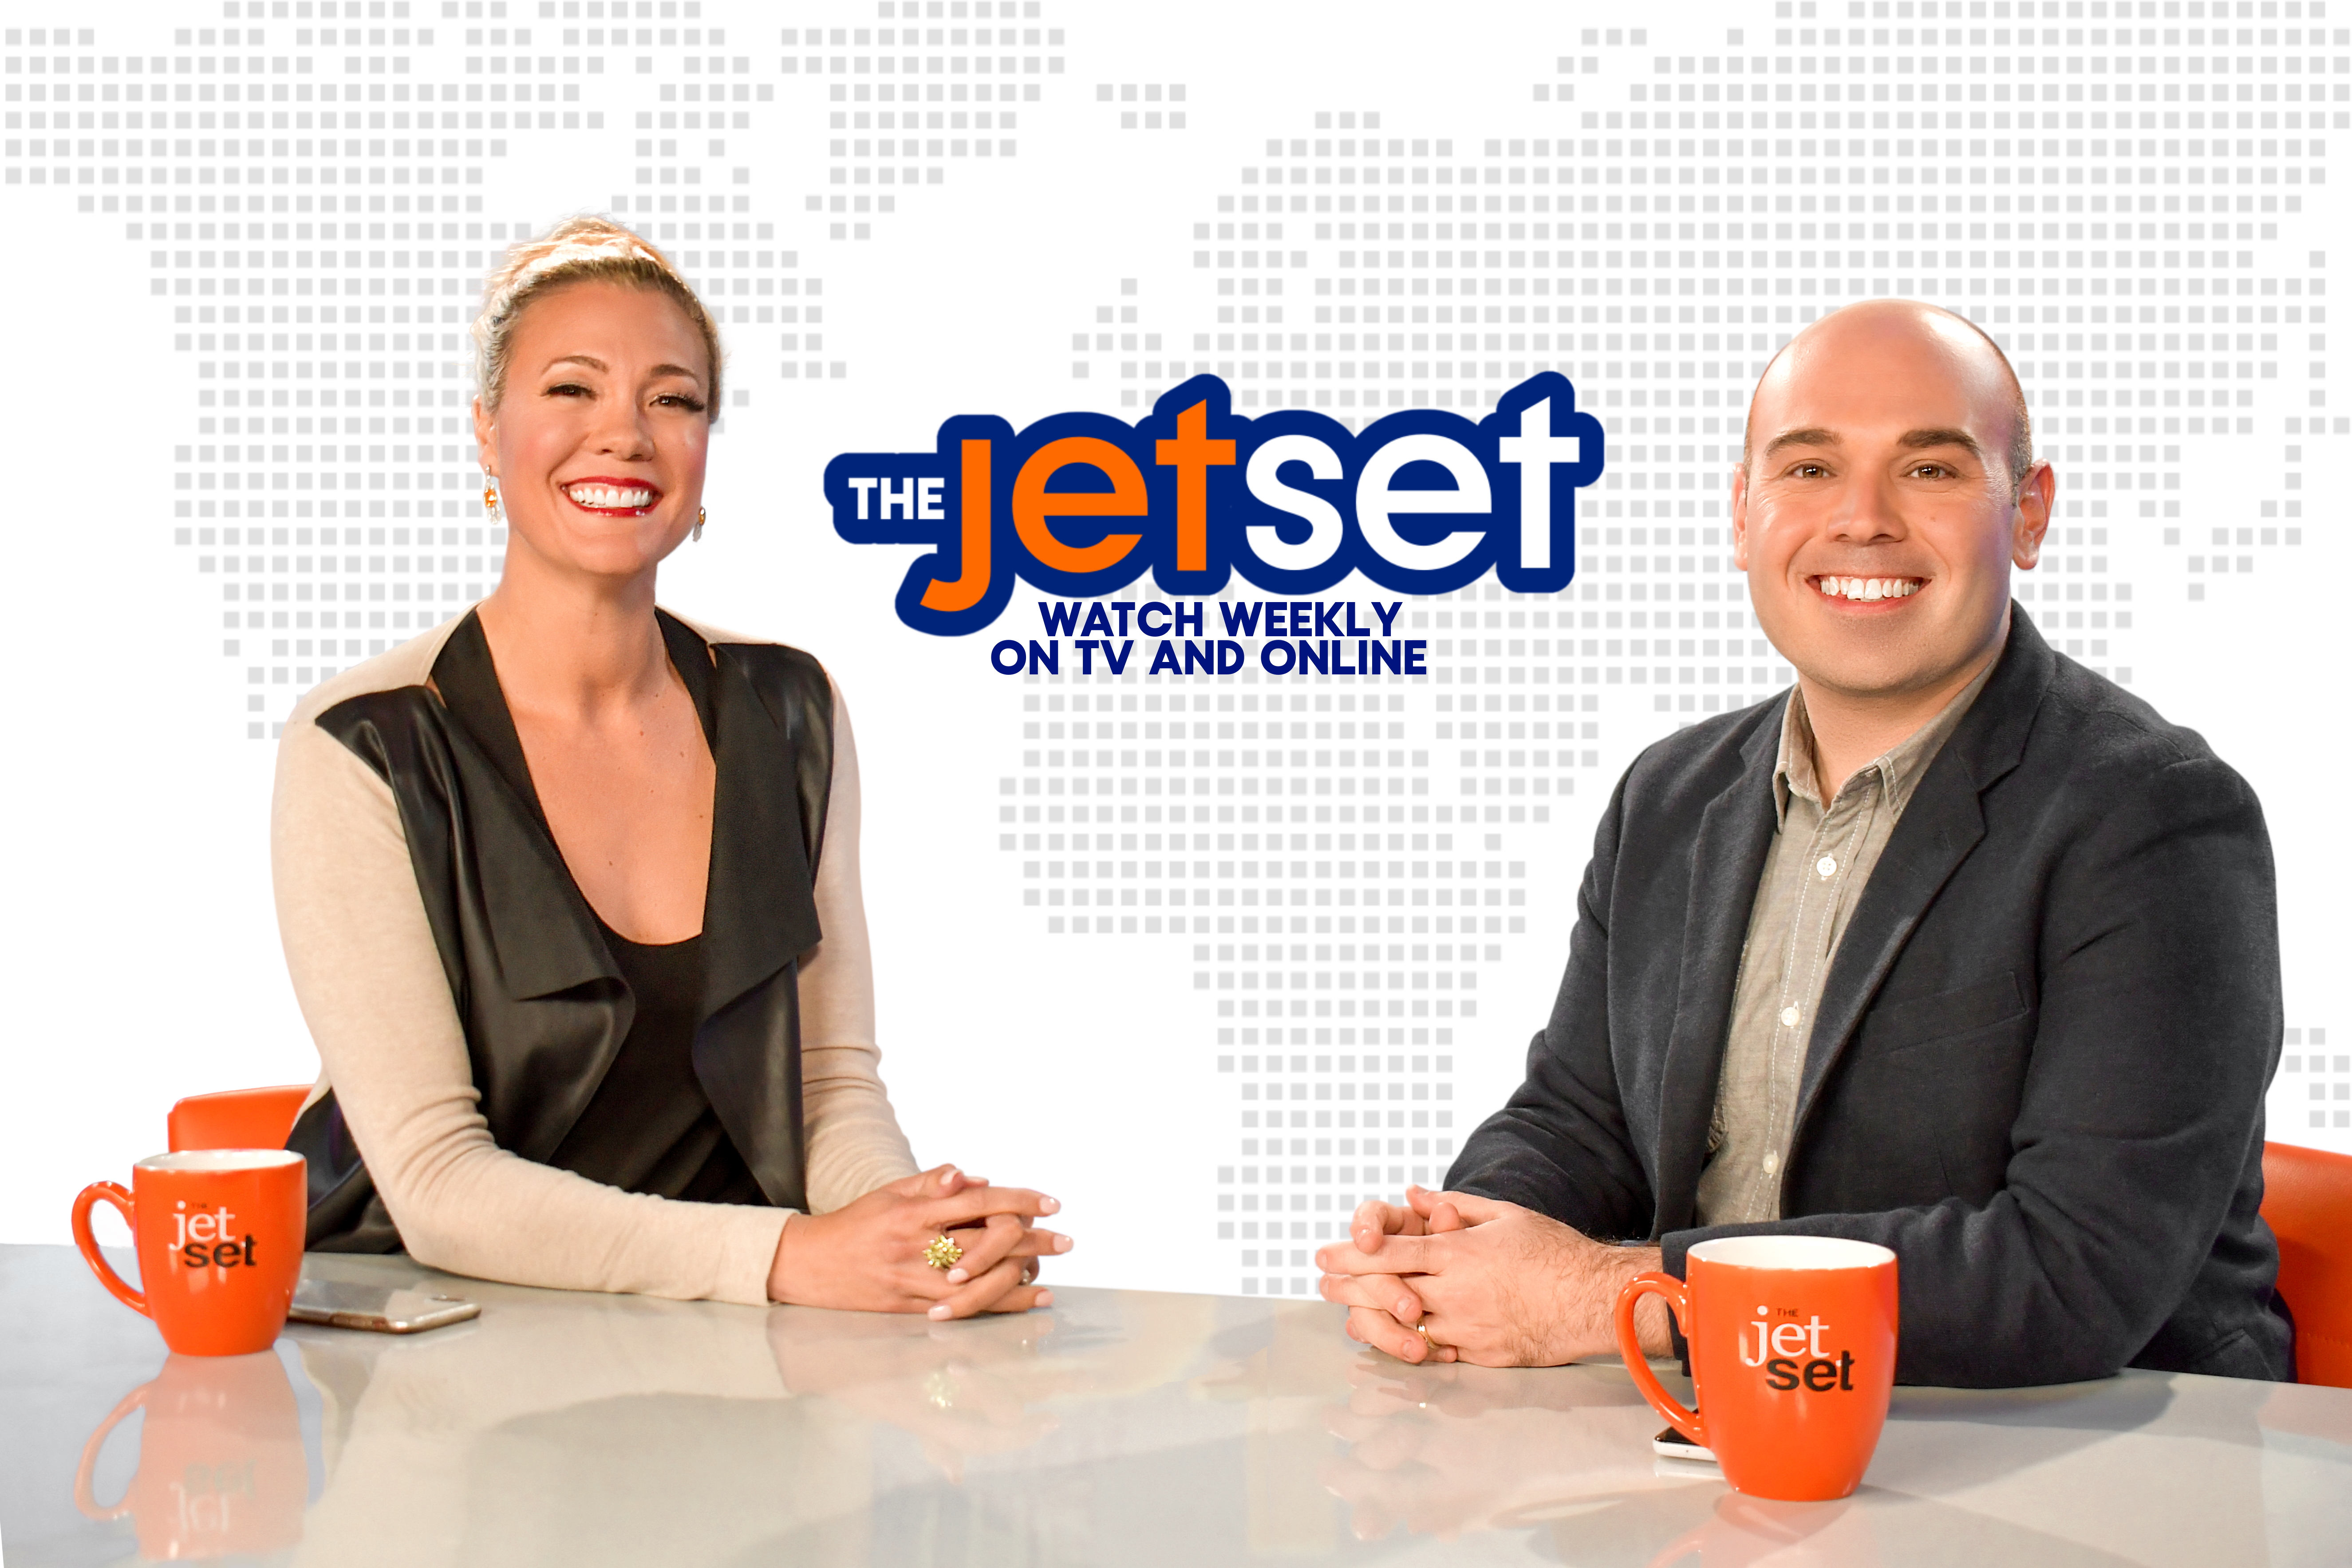 National Travel TV Show "The Jet Set" Arrives on YouToo America